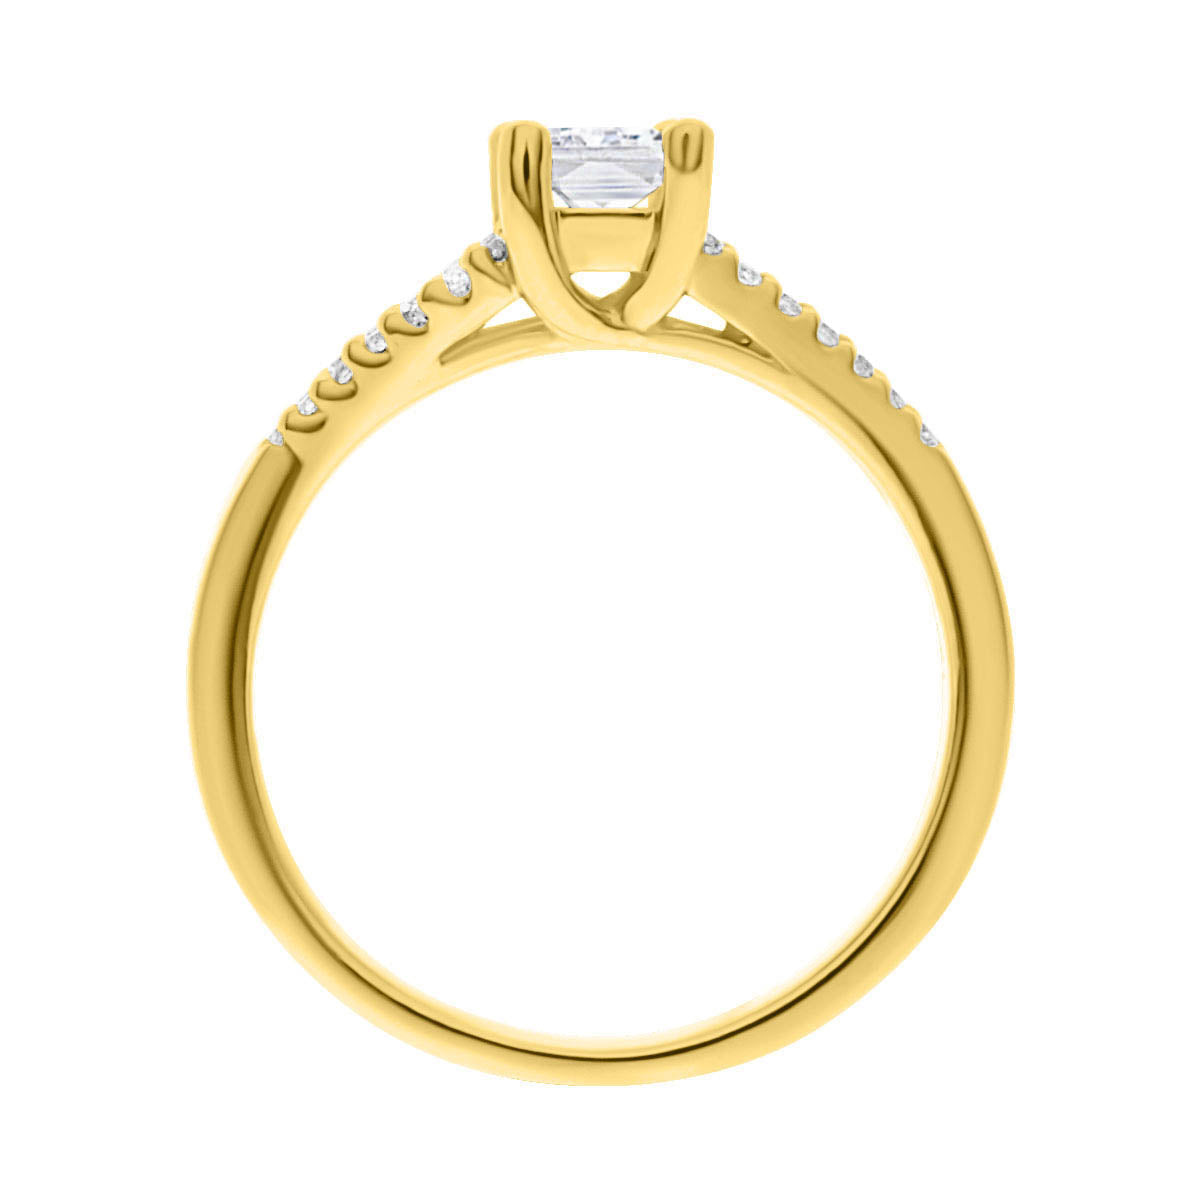 Radiant Cut Diamond Ring in yellow gold standing upright